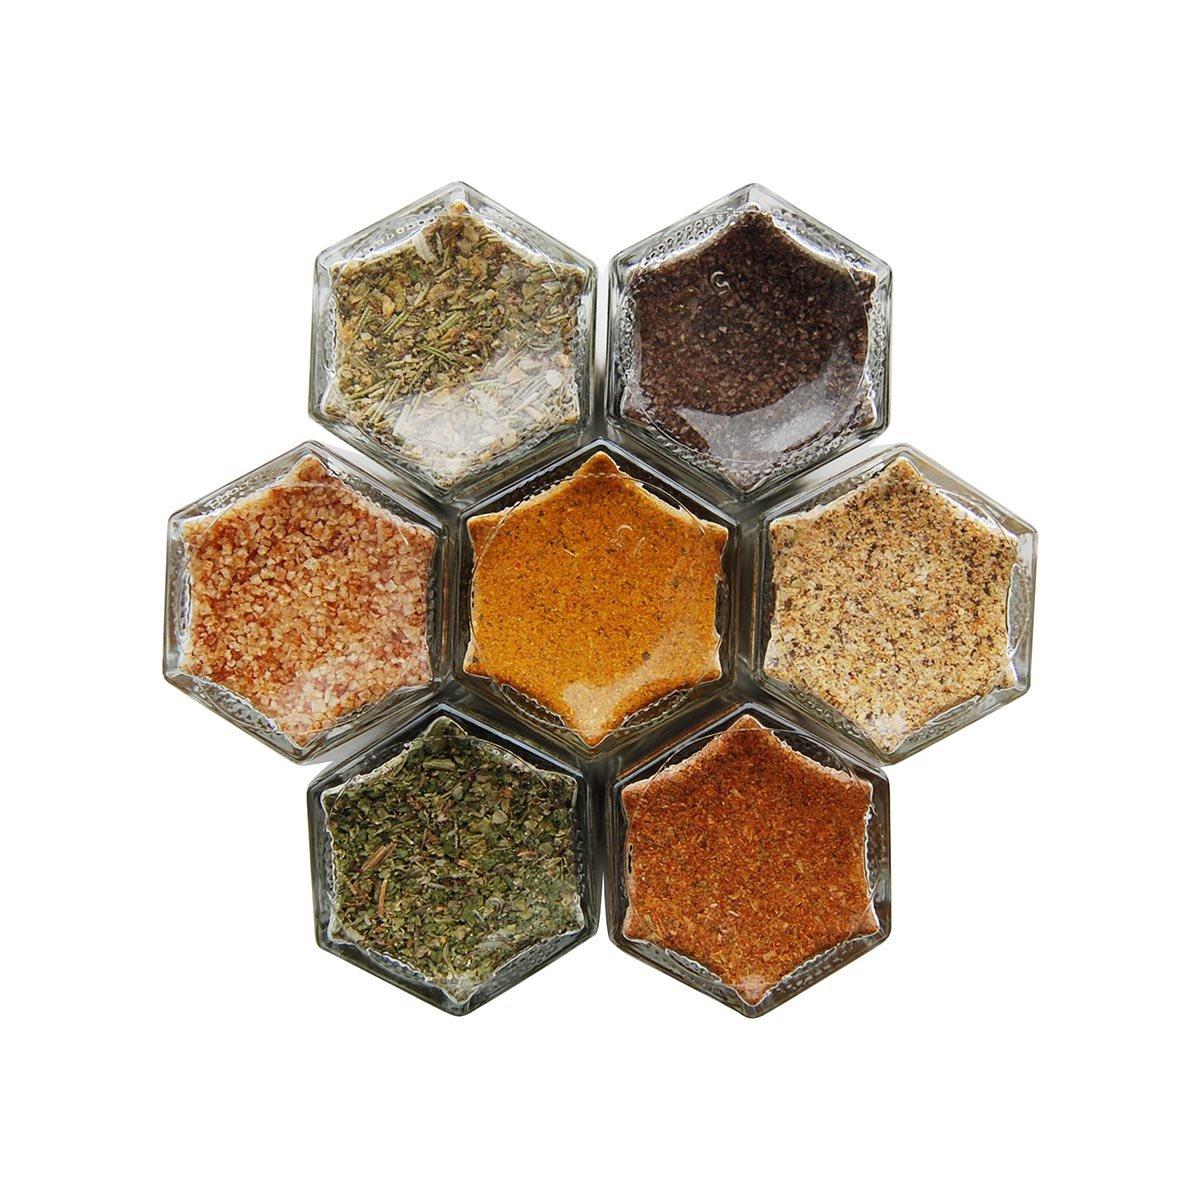 Good Cooking Adjustable Glass Spice Jar – Grill This BBQ Supply LLC